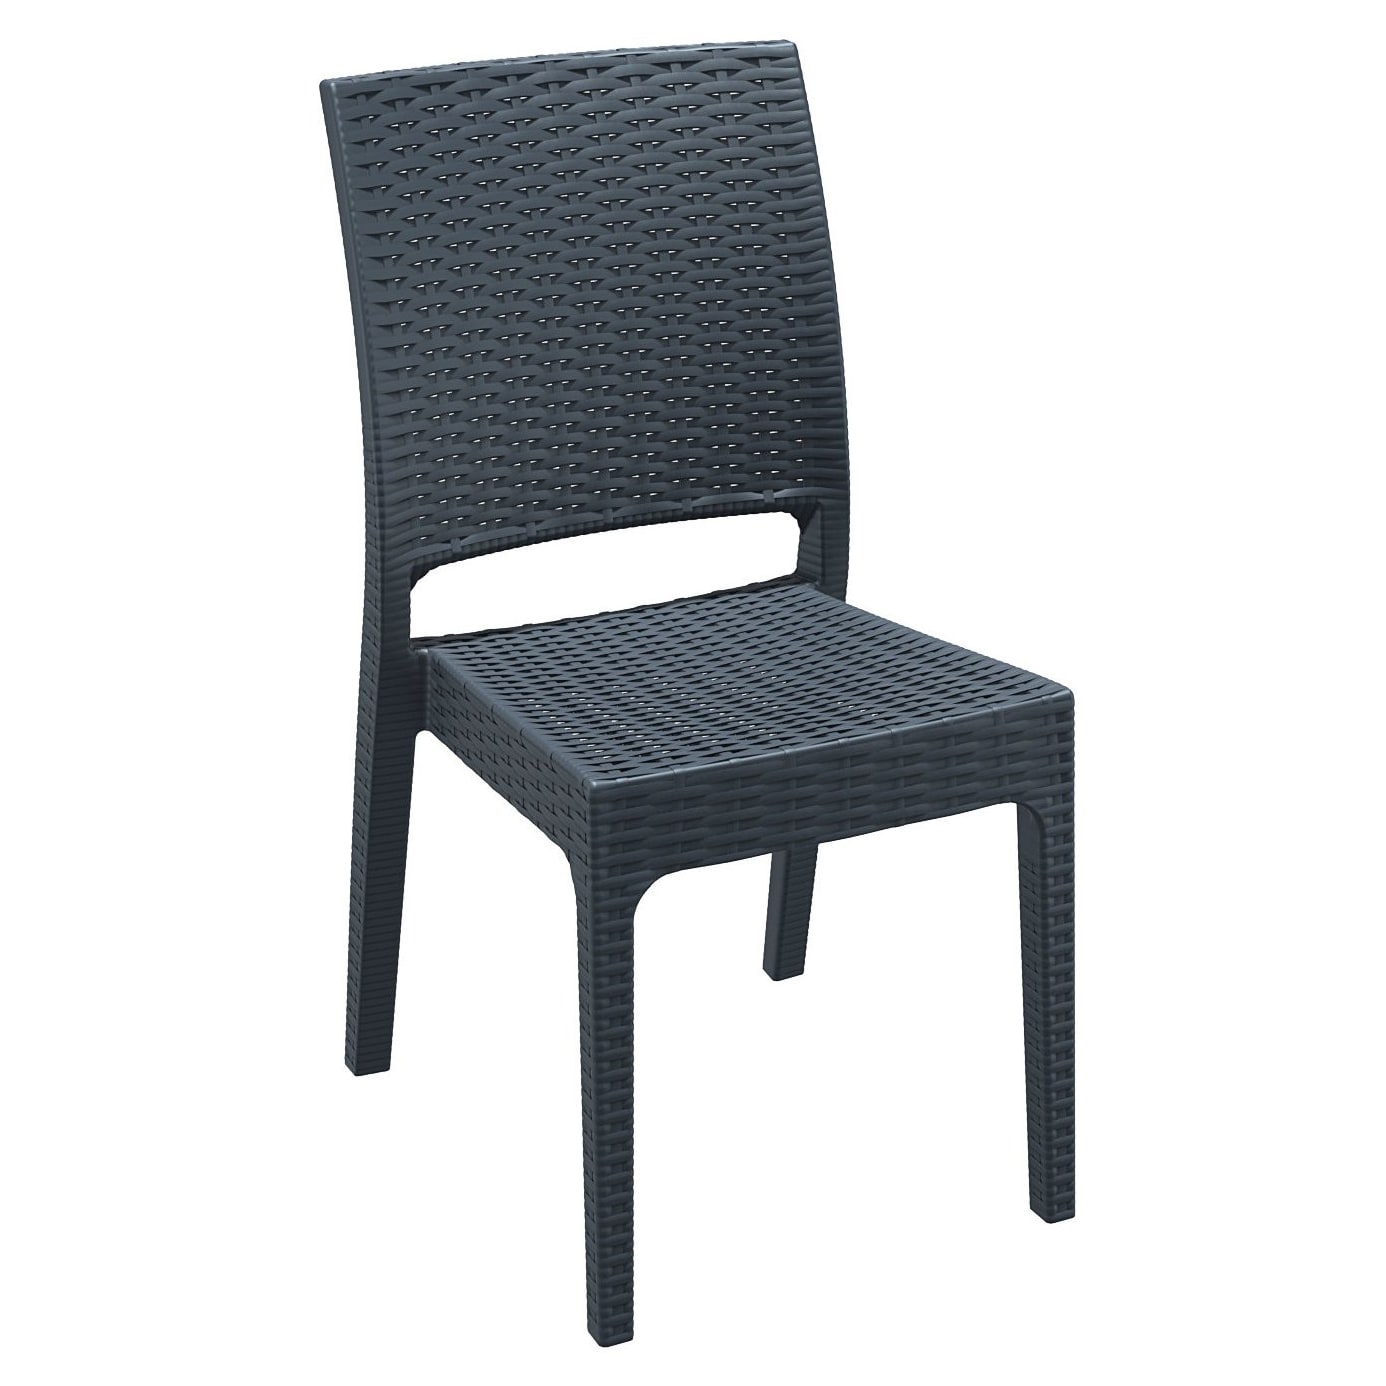 Beverly Wicker Look Resin Patio Chair with Beverly Wicker Look Resin Patio Chair